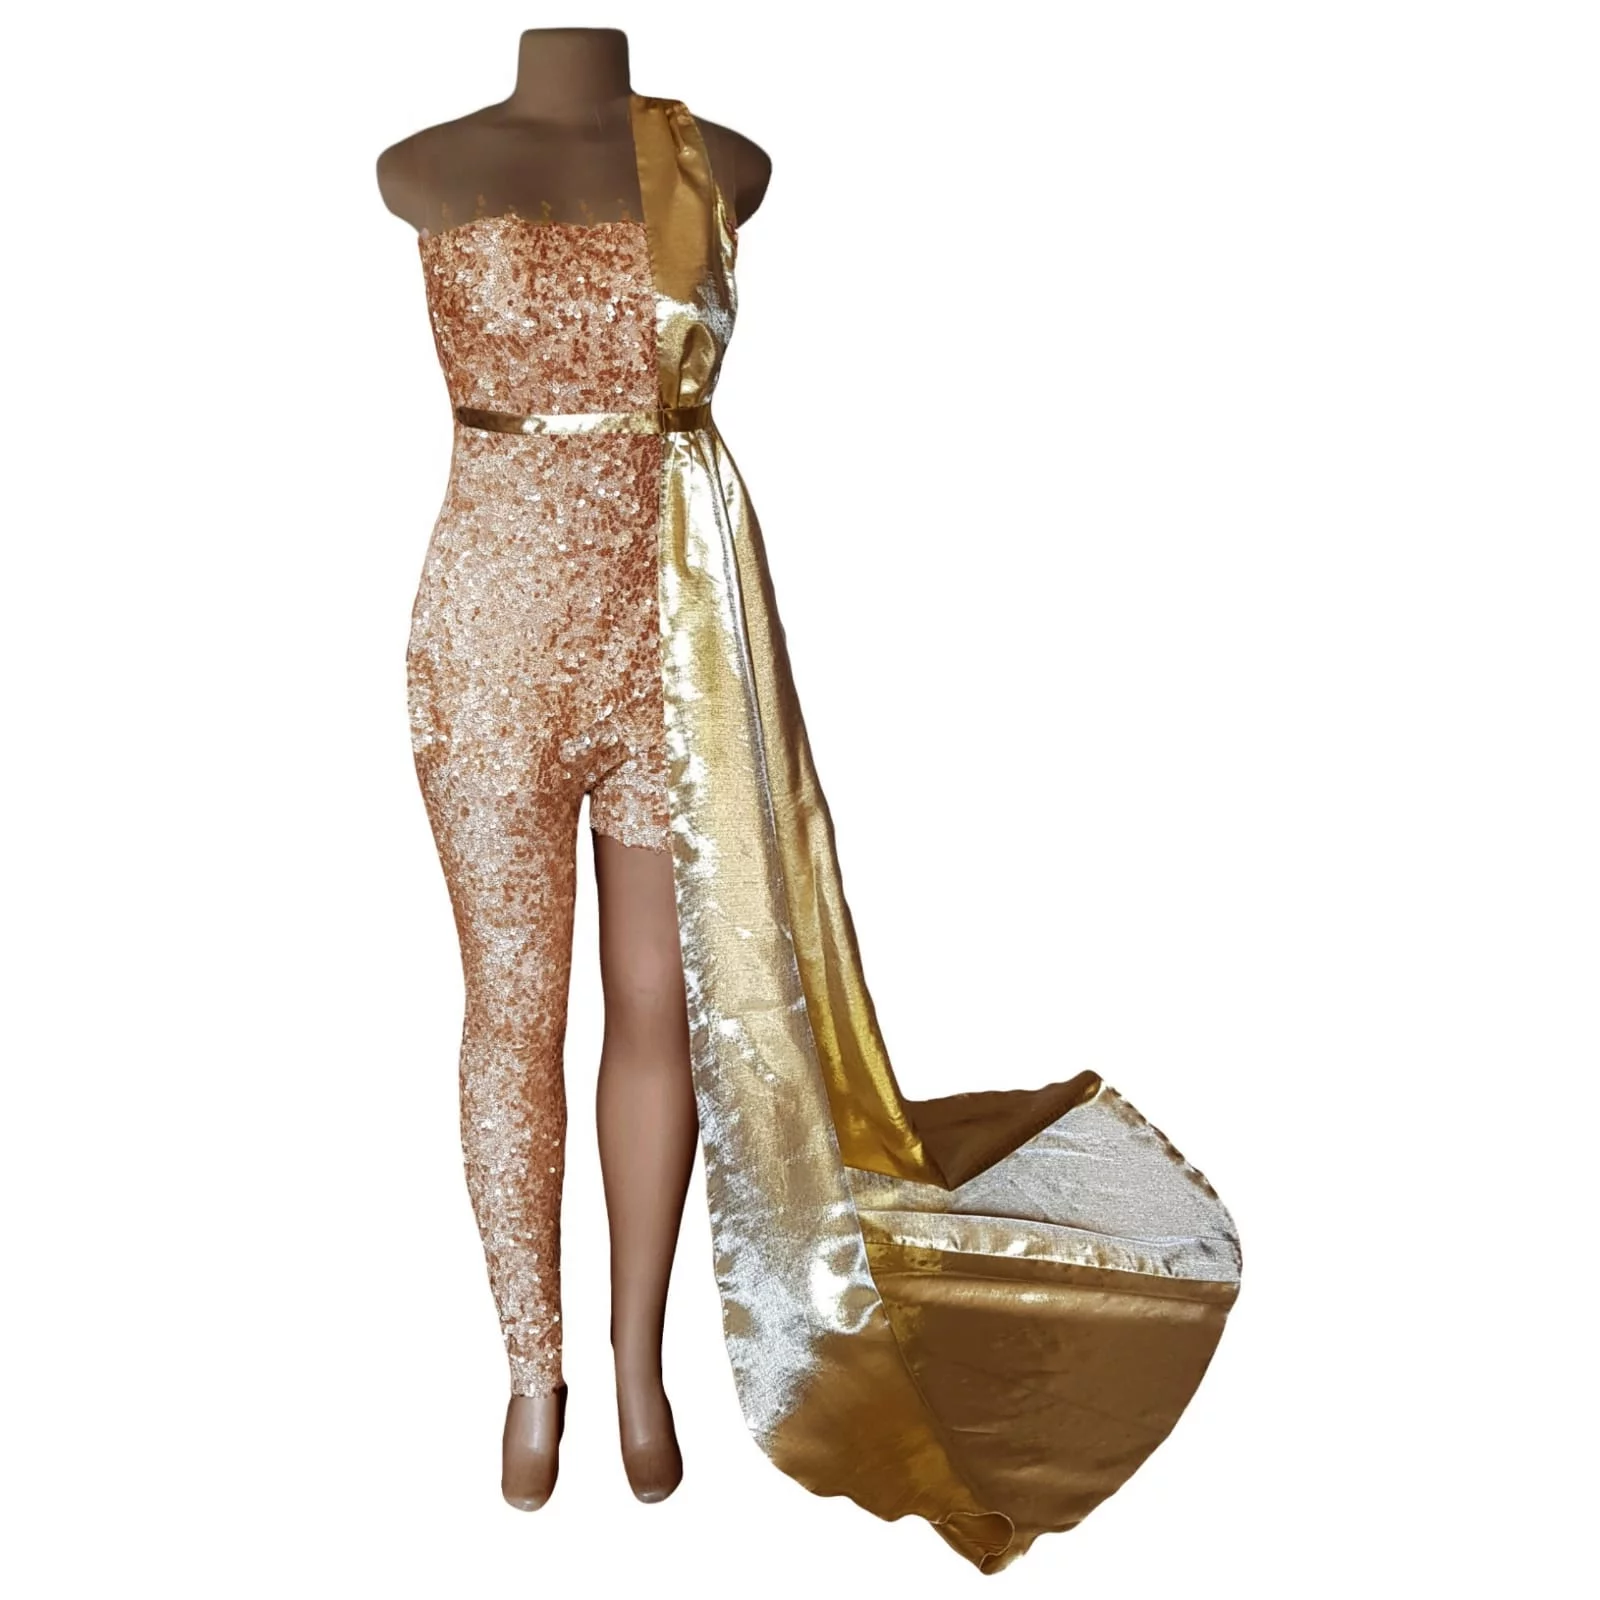 Gold sequins evening wear bodysuit 3 gold sequins evening wear bodysuit with an illusion neckline and sleeves, detailed with gold beads. With a long and short leg. Detachable side gold train.